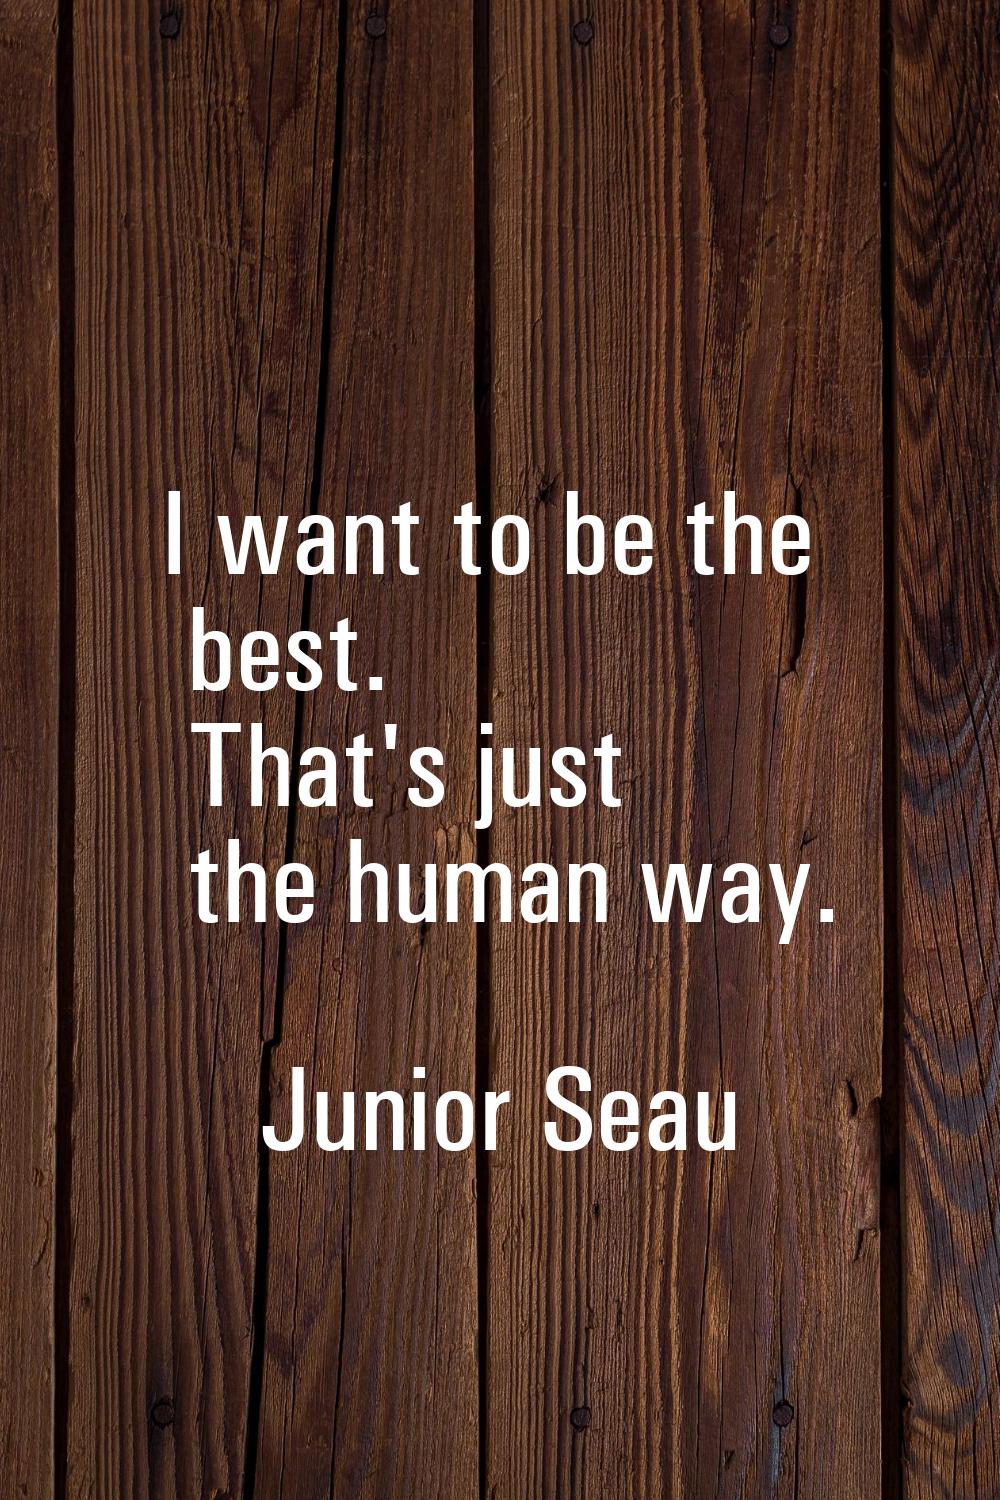 I want to be the best. That's just the human way.